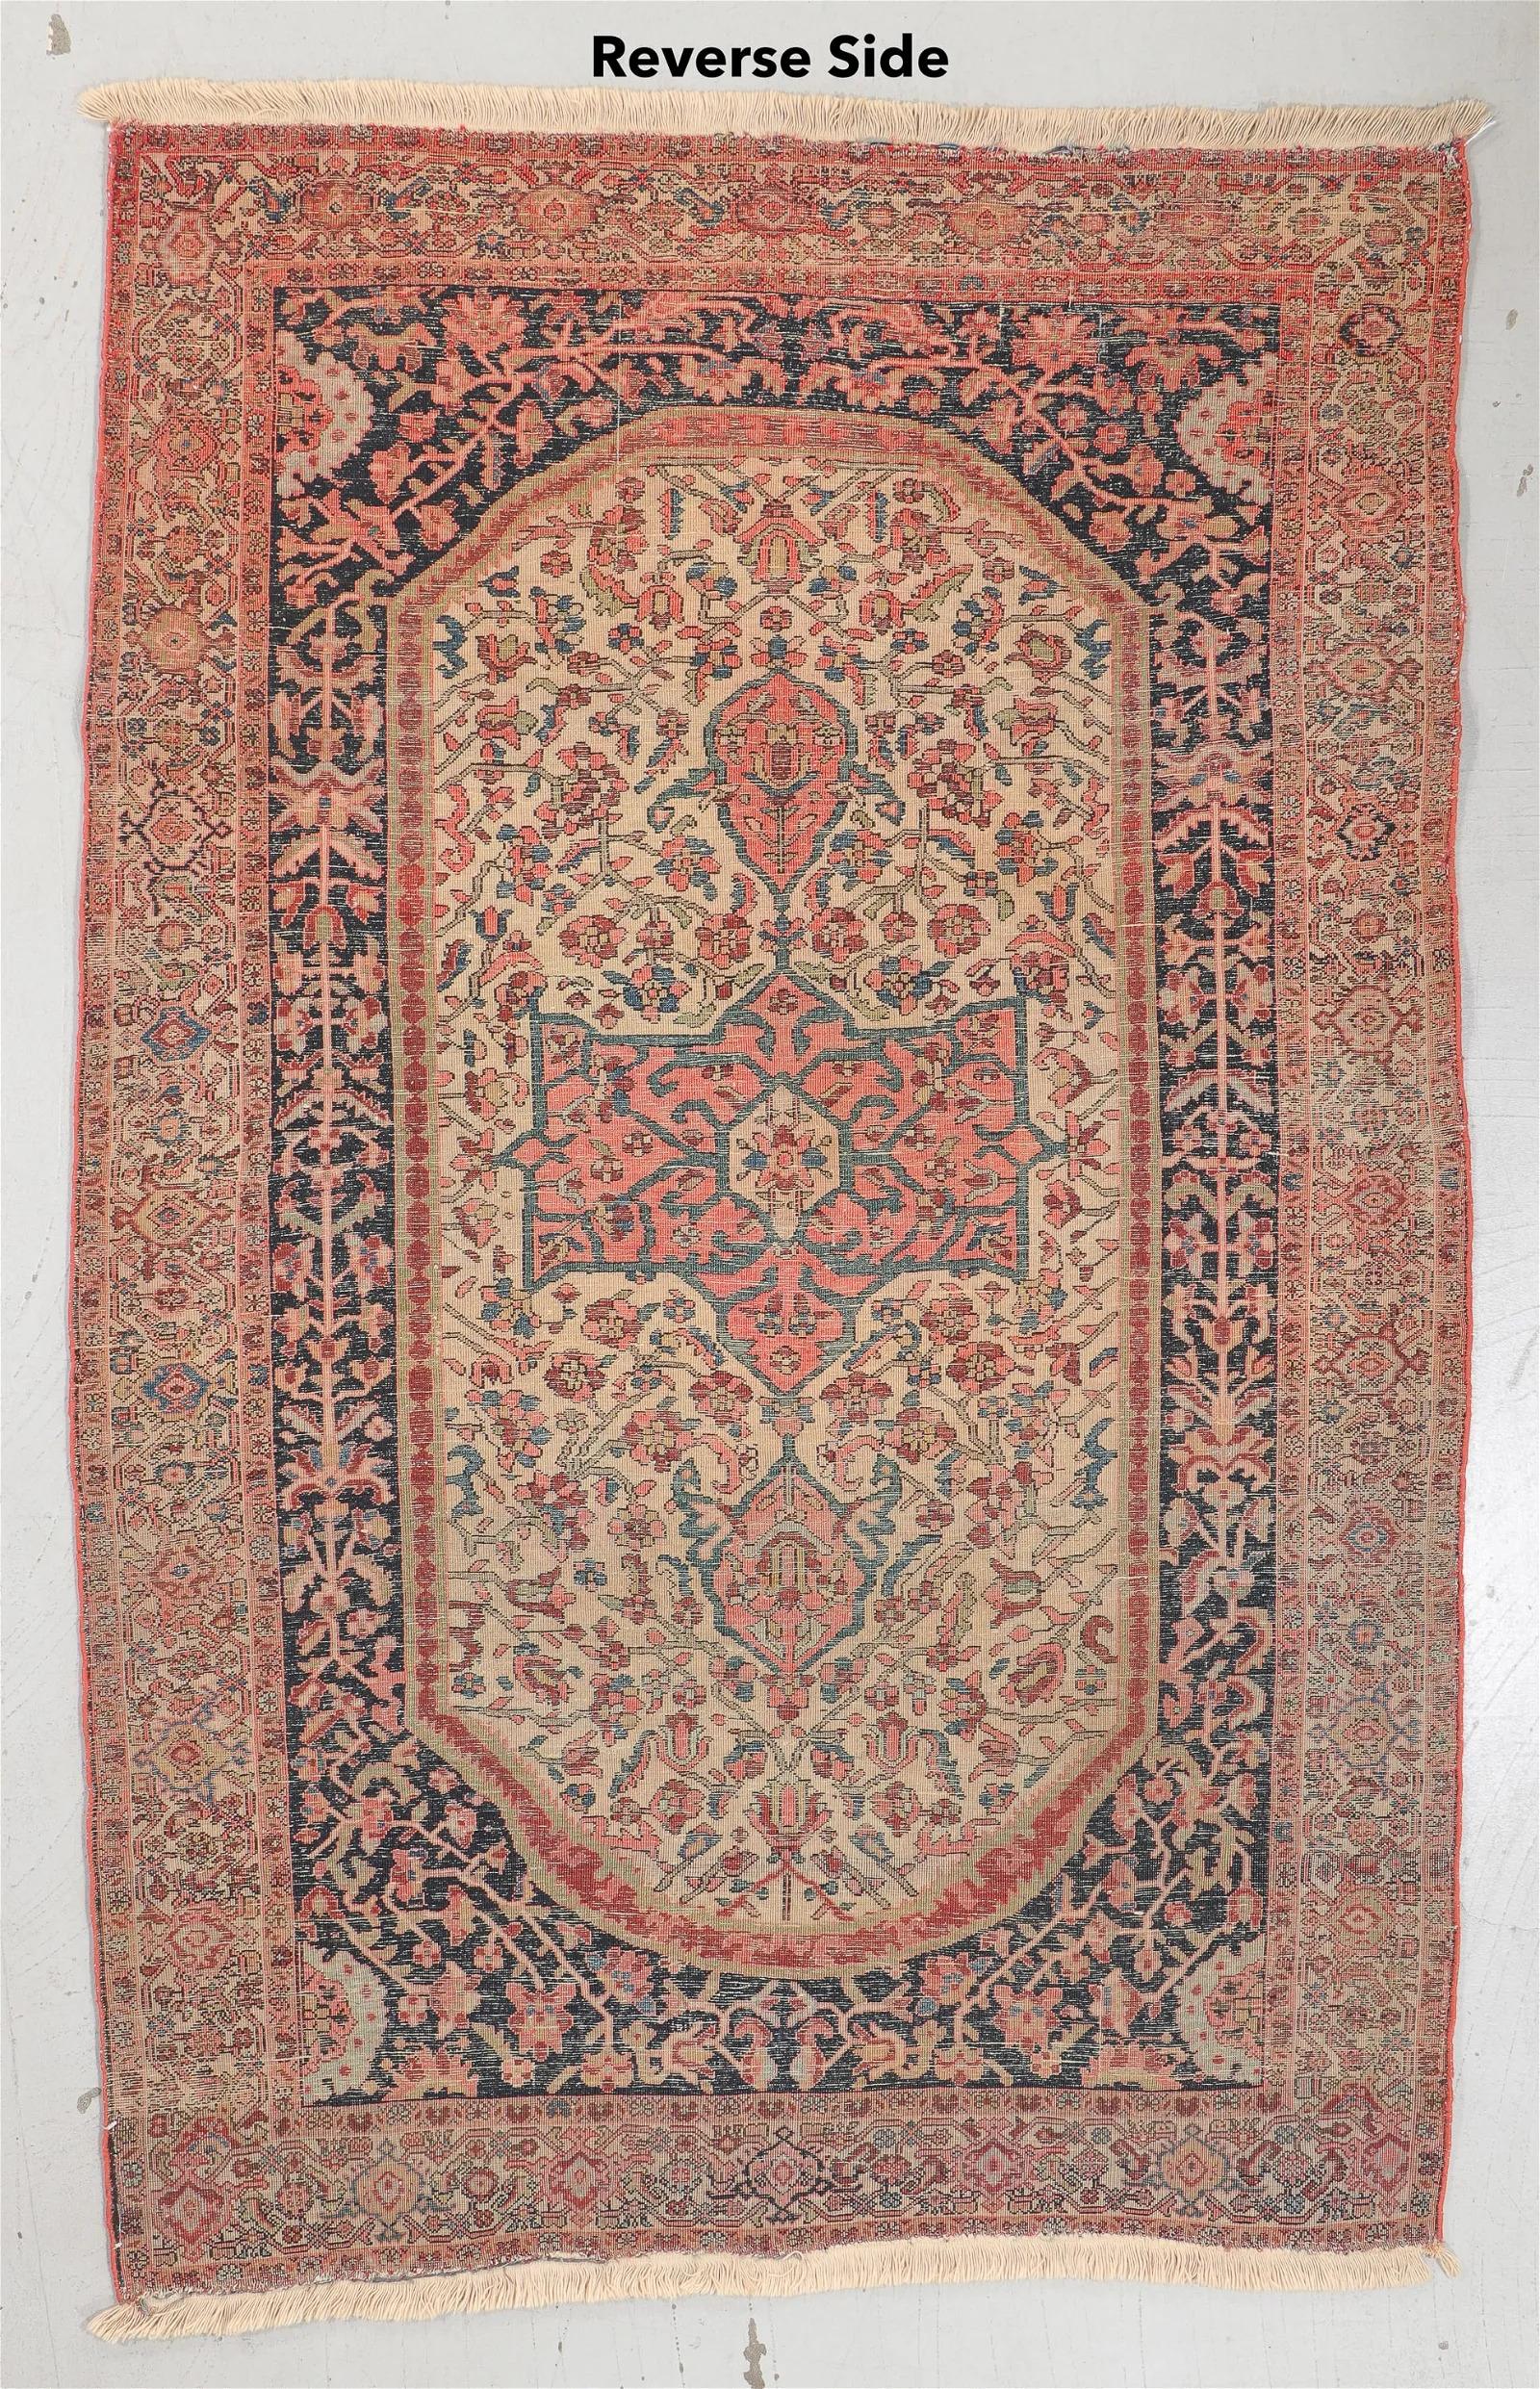 Embrace the timeless elegance of Persian weaving with this exquisite Sarouk Ferahan Rug, hailing from Persia and dating back to circa 1900. Measuring 4 feet 3 inches in width and 6 feet 10 inches in length (130 x 208 cm), this captivating rug is a